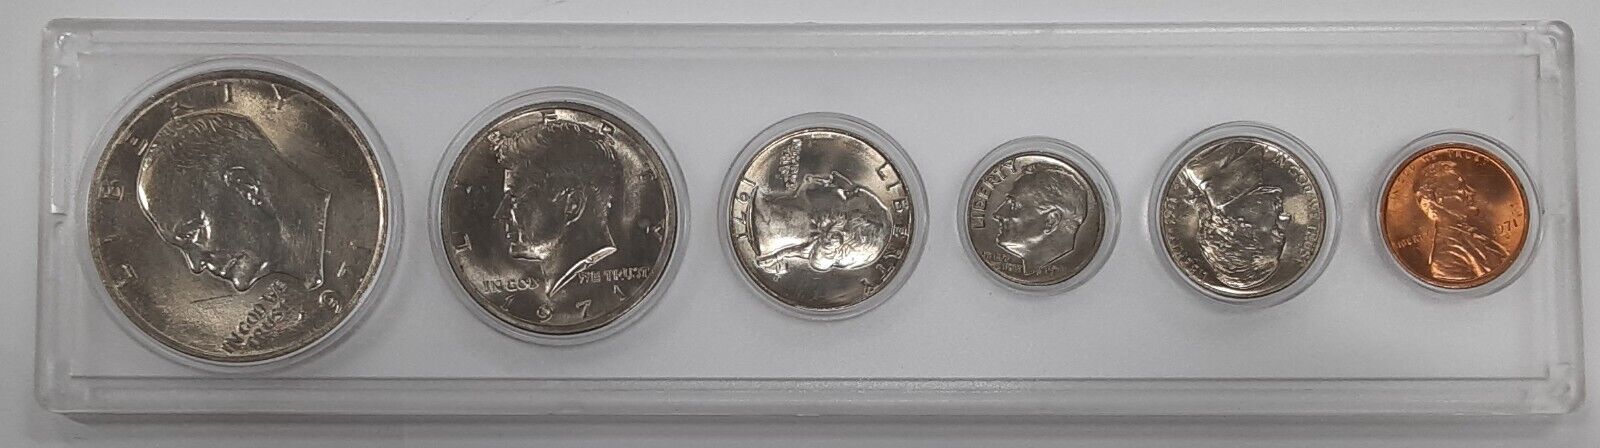 1971-D Complete Year Set W/Cent Thru Dollar Uncirculated in Whitman Holder